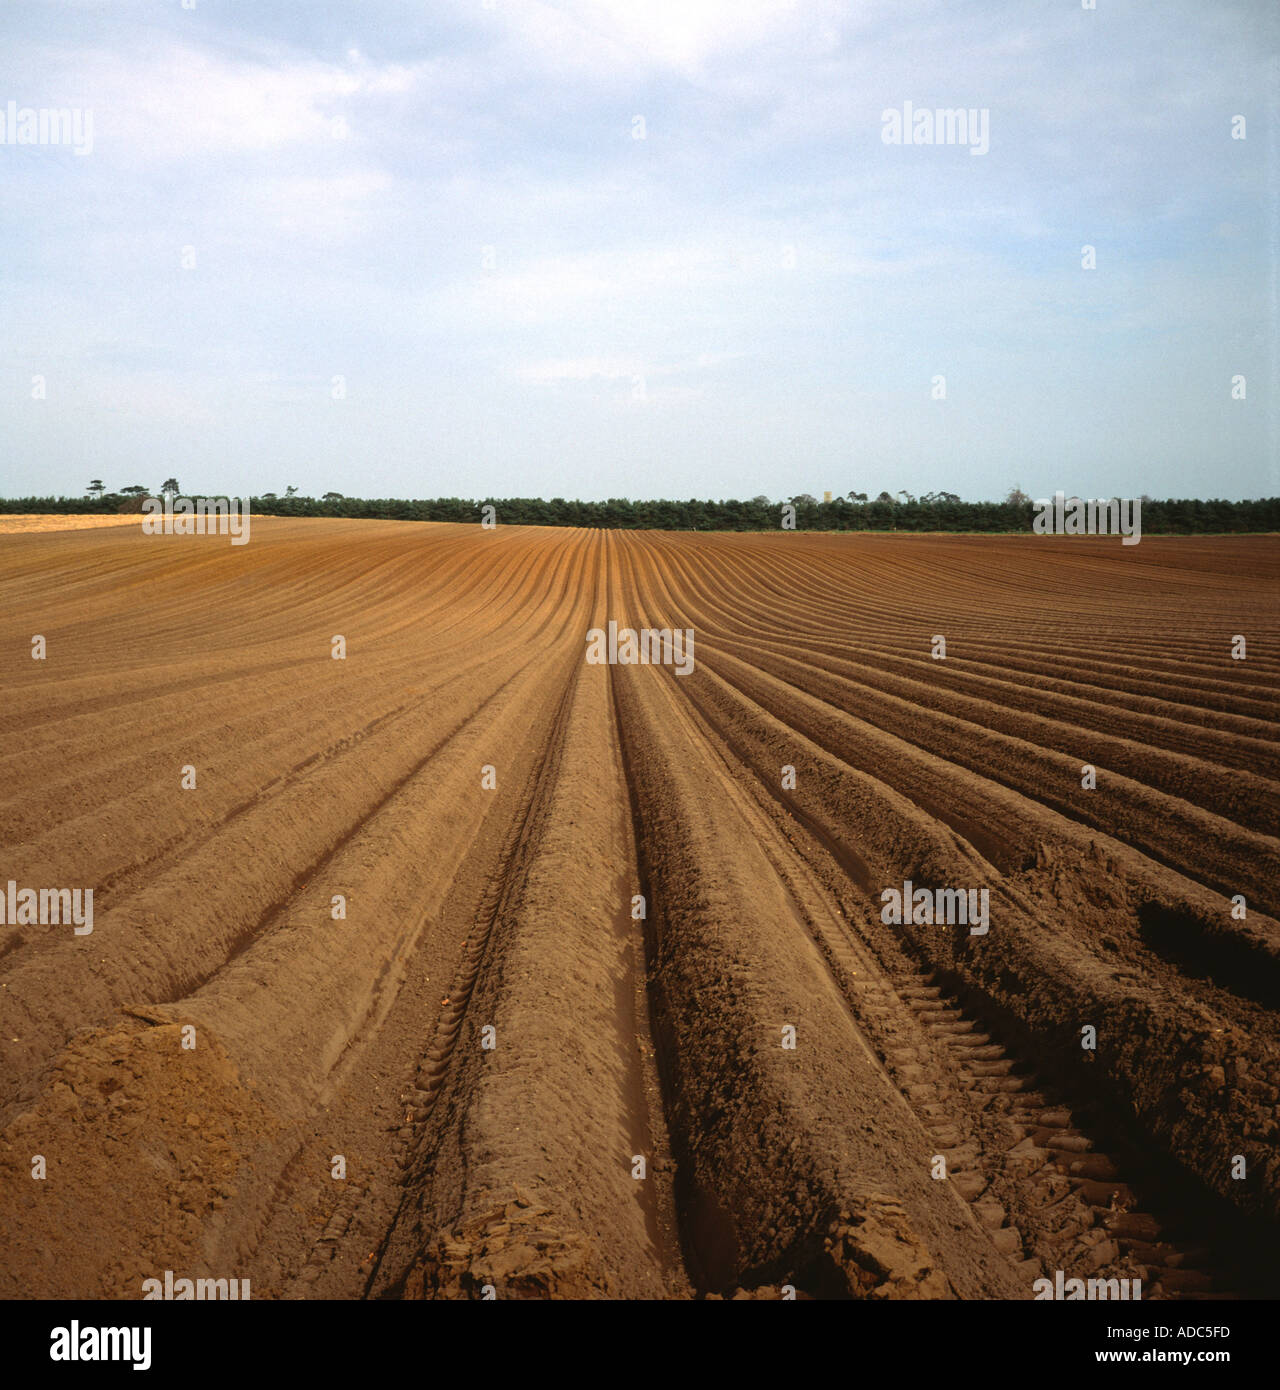 Furrows in aploughed field Suffolk sandlings England Stock Photo